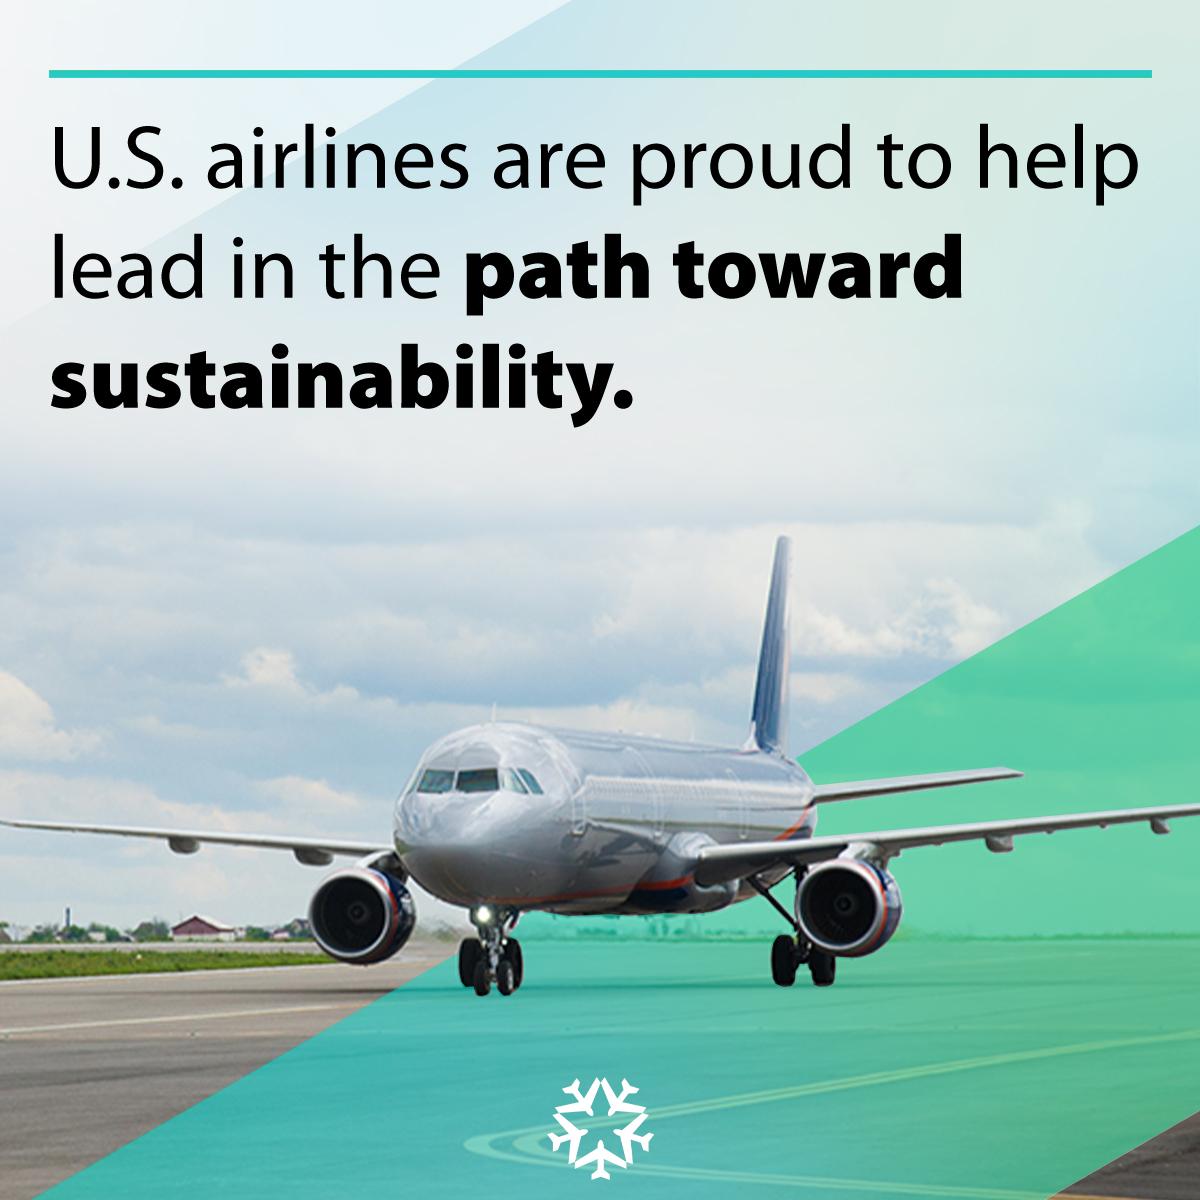 U.S. airlines are committed to sustainability year round. We’re doing our part by scaling up Sustainable Aviation Fuel (SAF) and working toward net-zero carbon emissions by 2050. Learn more: bit.ly/3PnTPFz #AirlinesFlyGreen